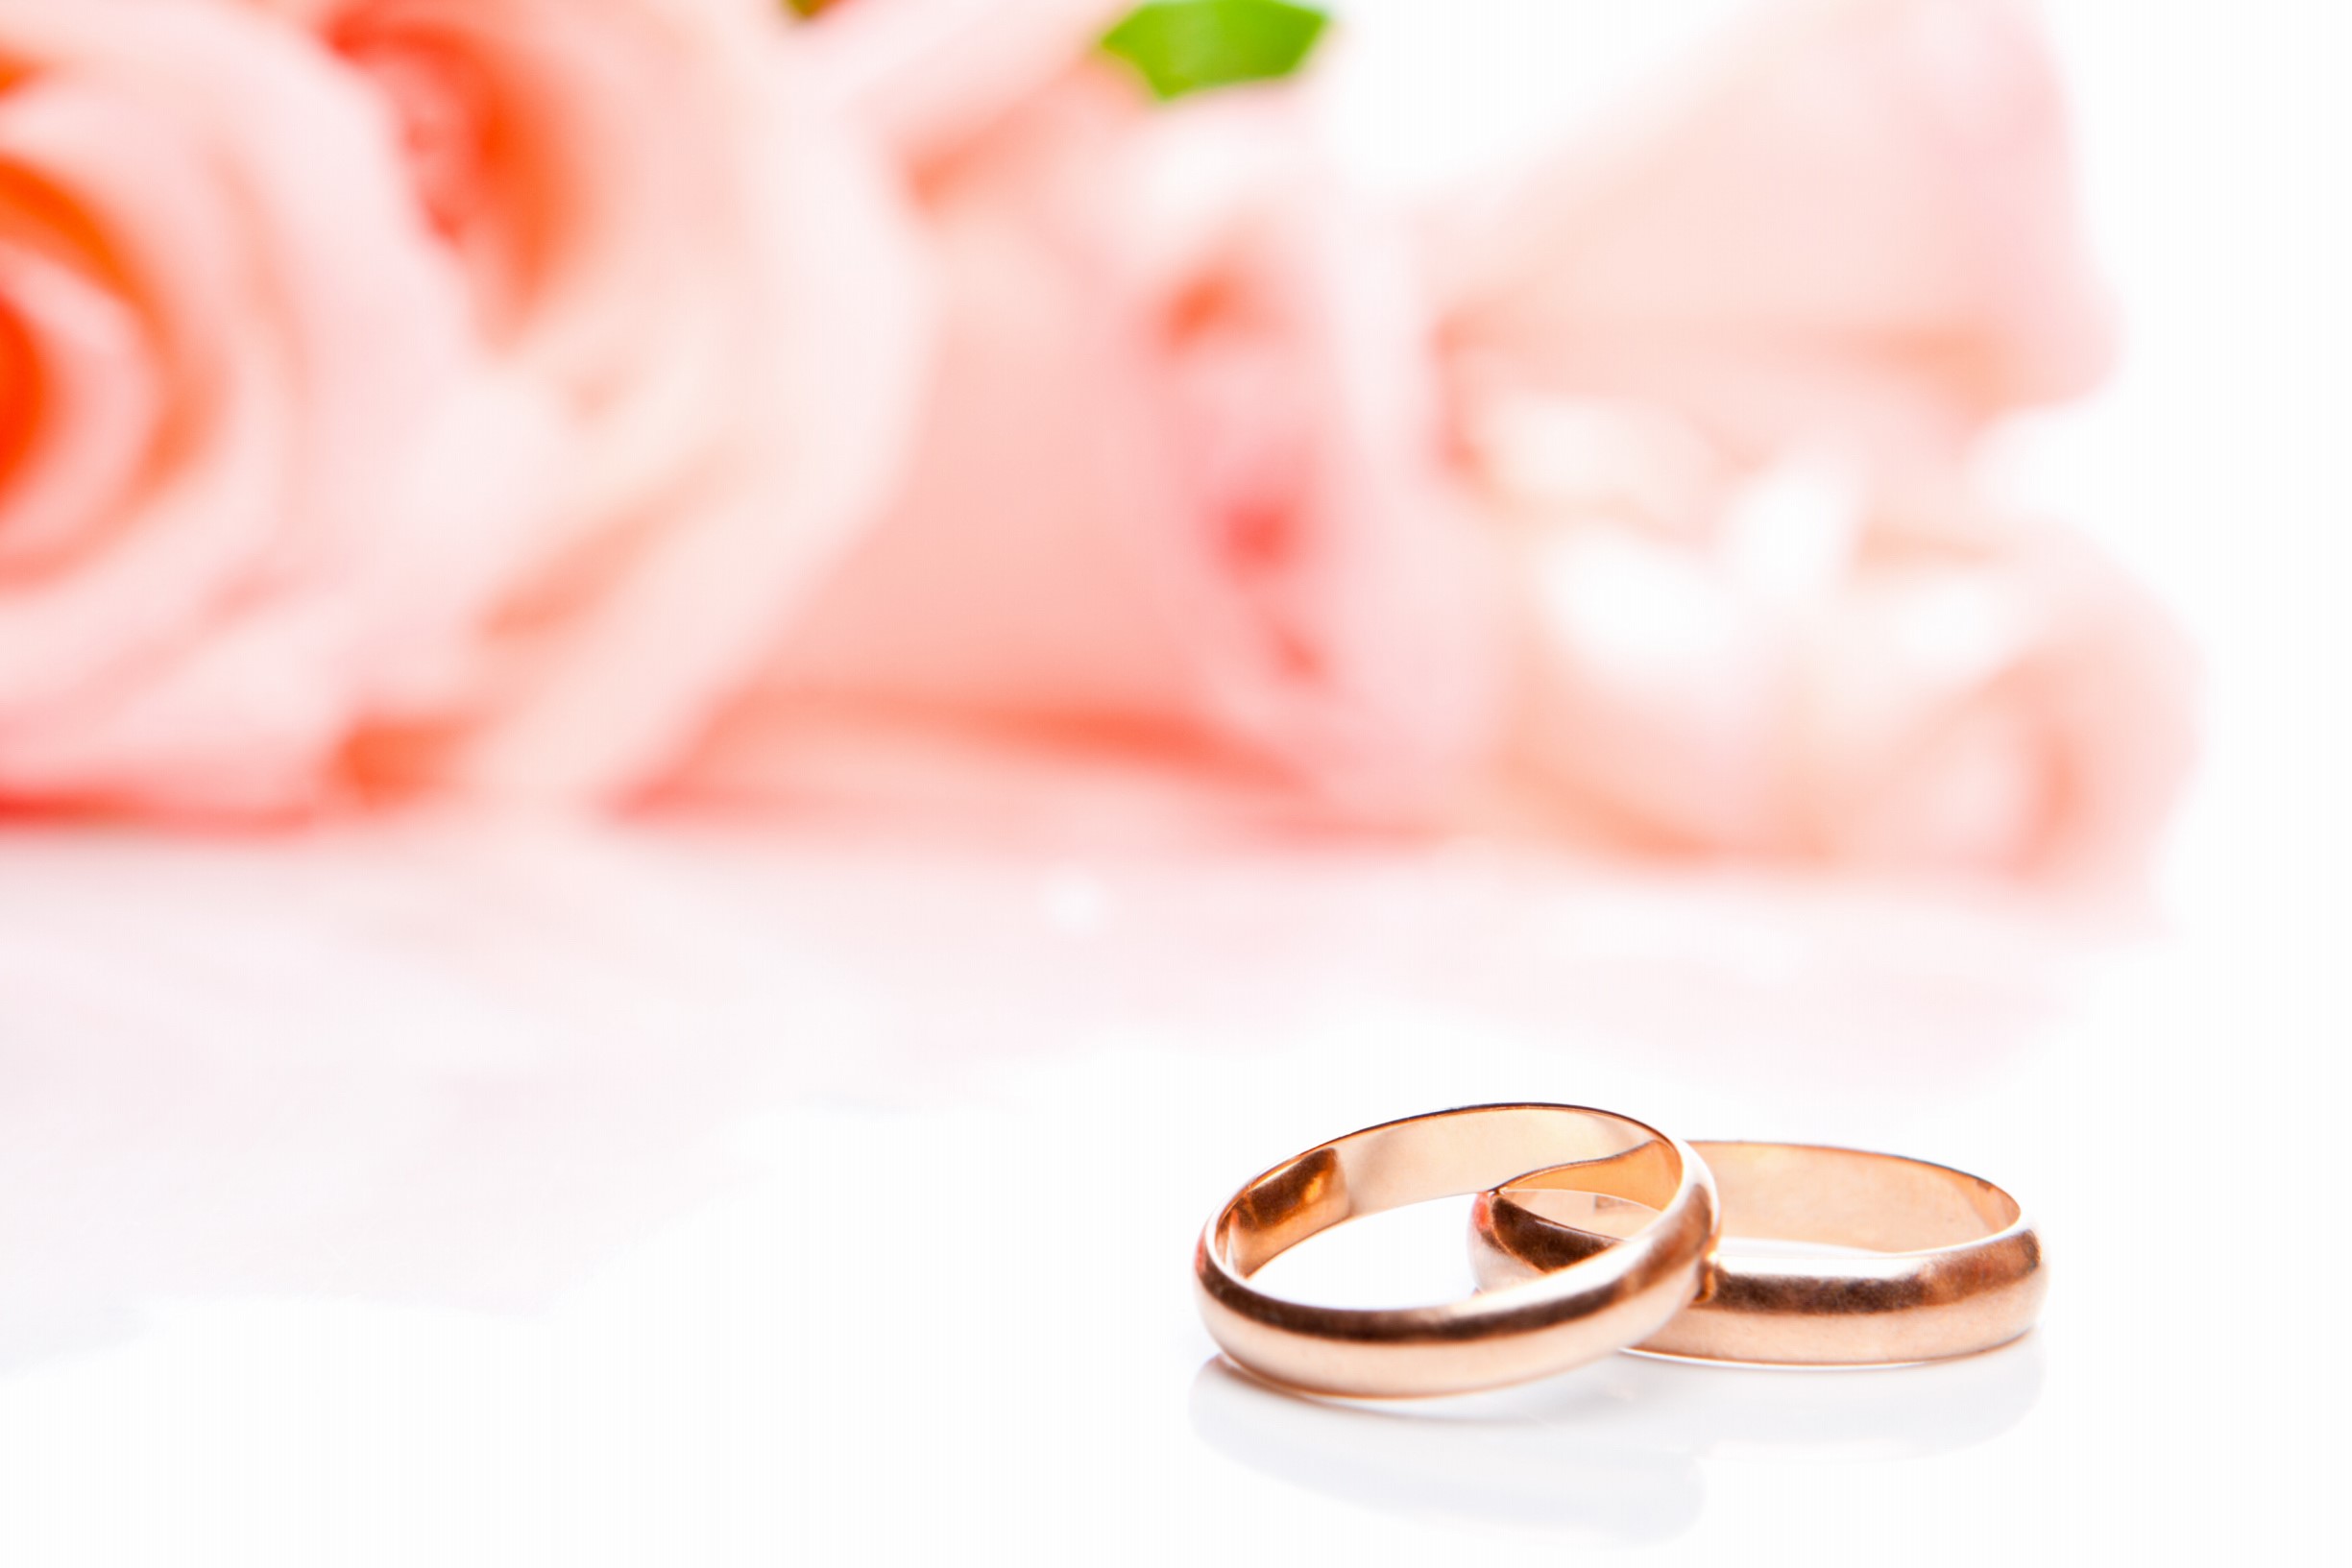 Rose Gold Wedding Bands: Stand Out From the Crowd